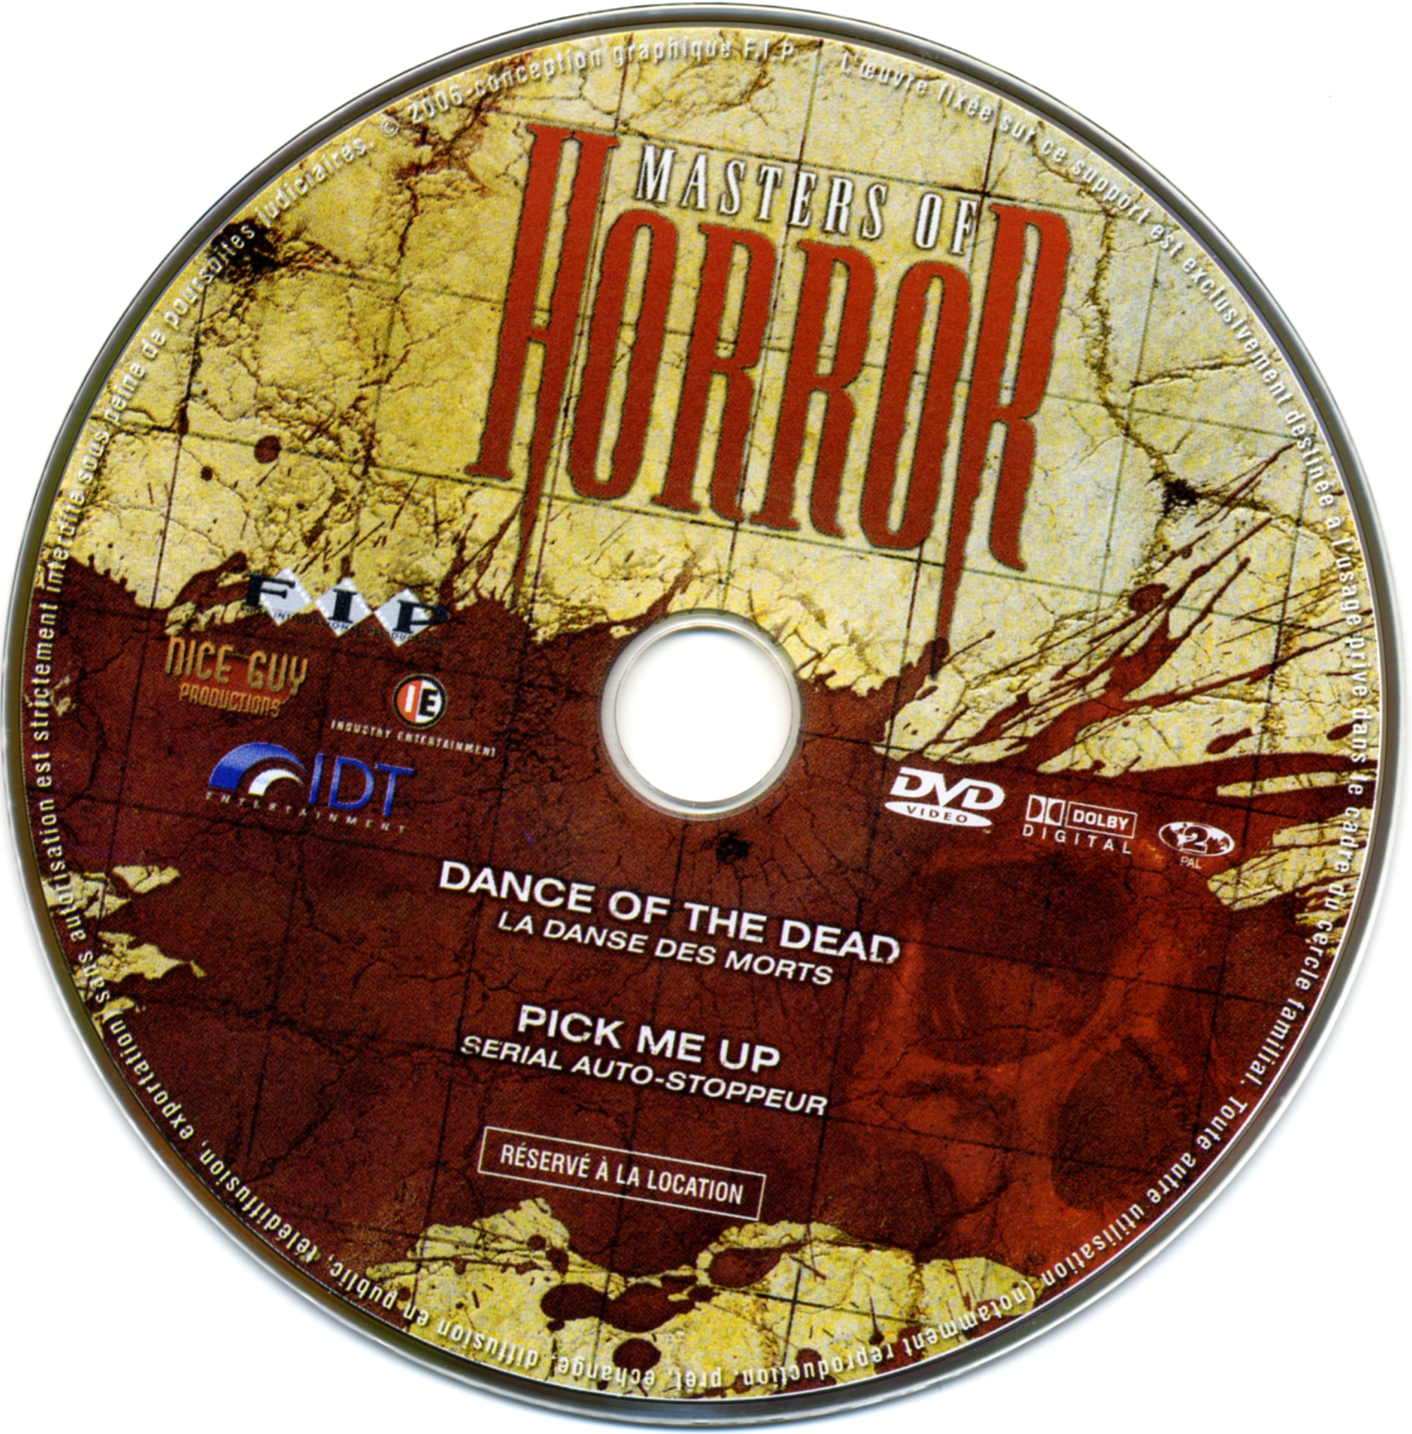 Masters of horror - dance of the death